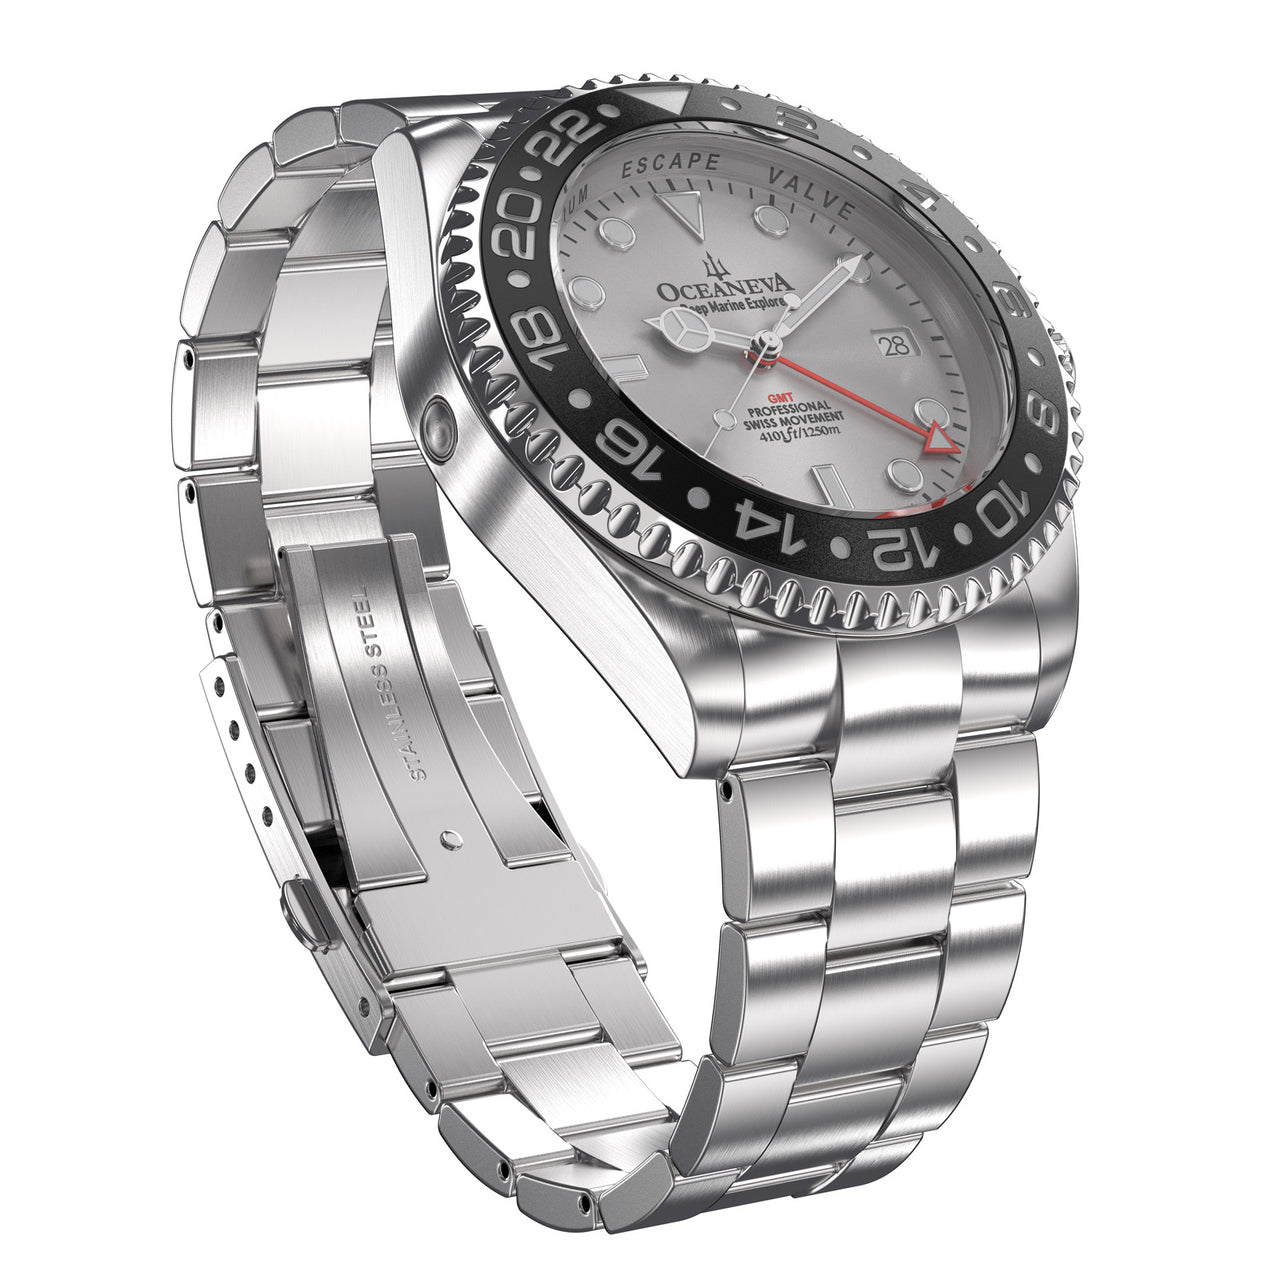 Oceaneva 1250M GMT Dive Watch Silver And Black Front Picture Slight Right Slant View